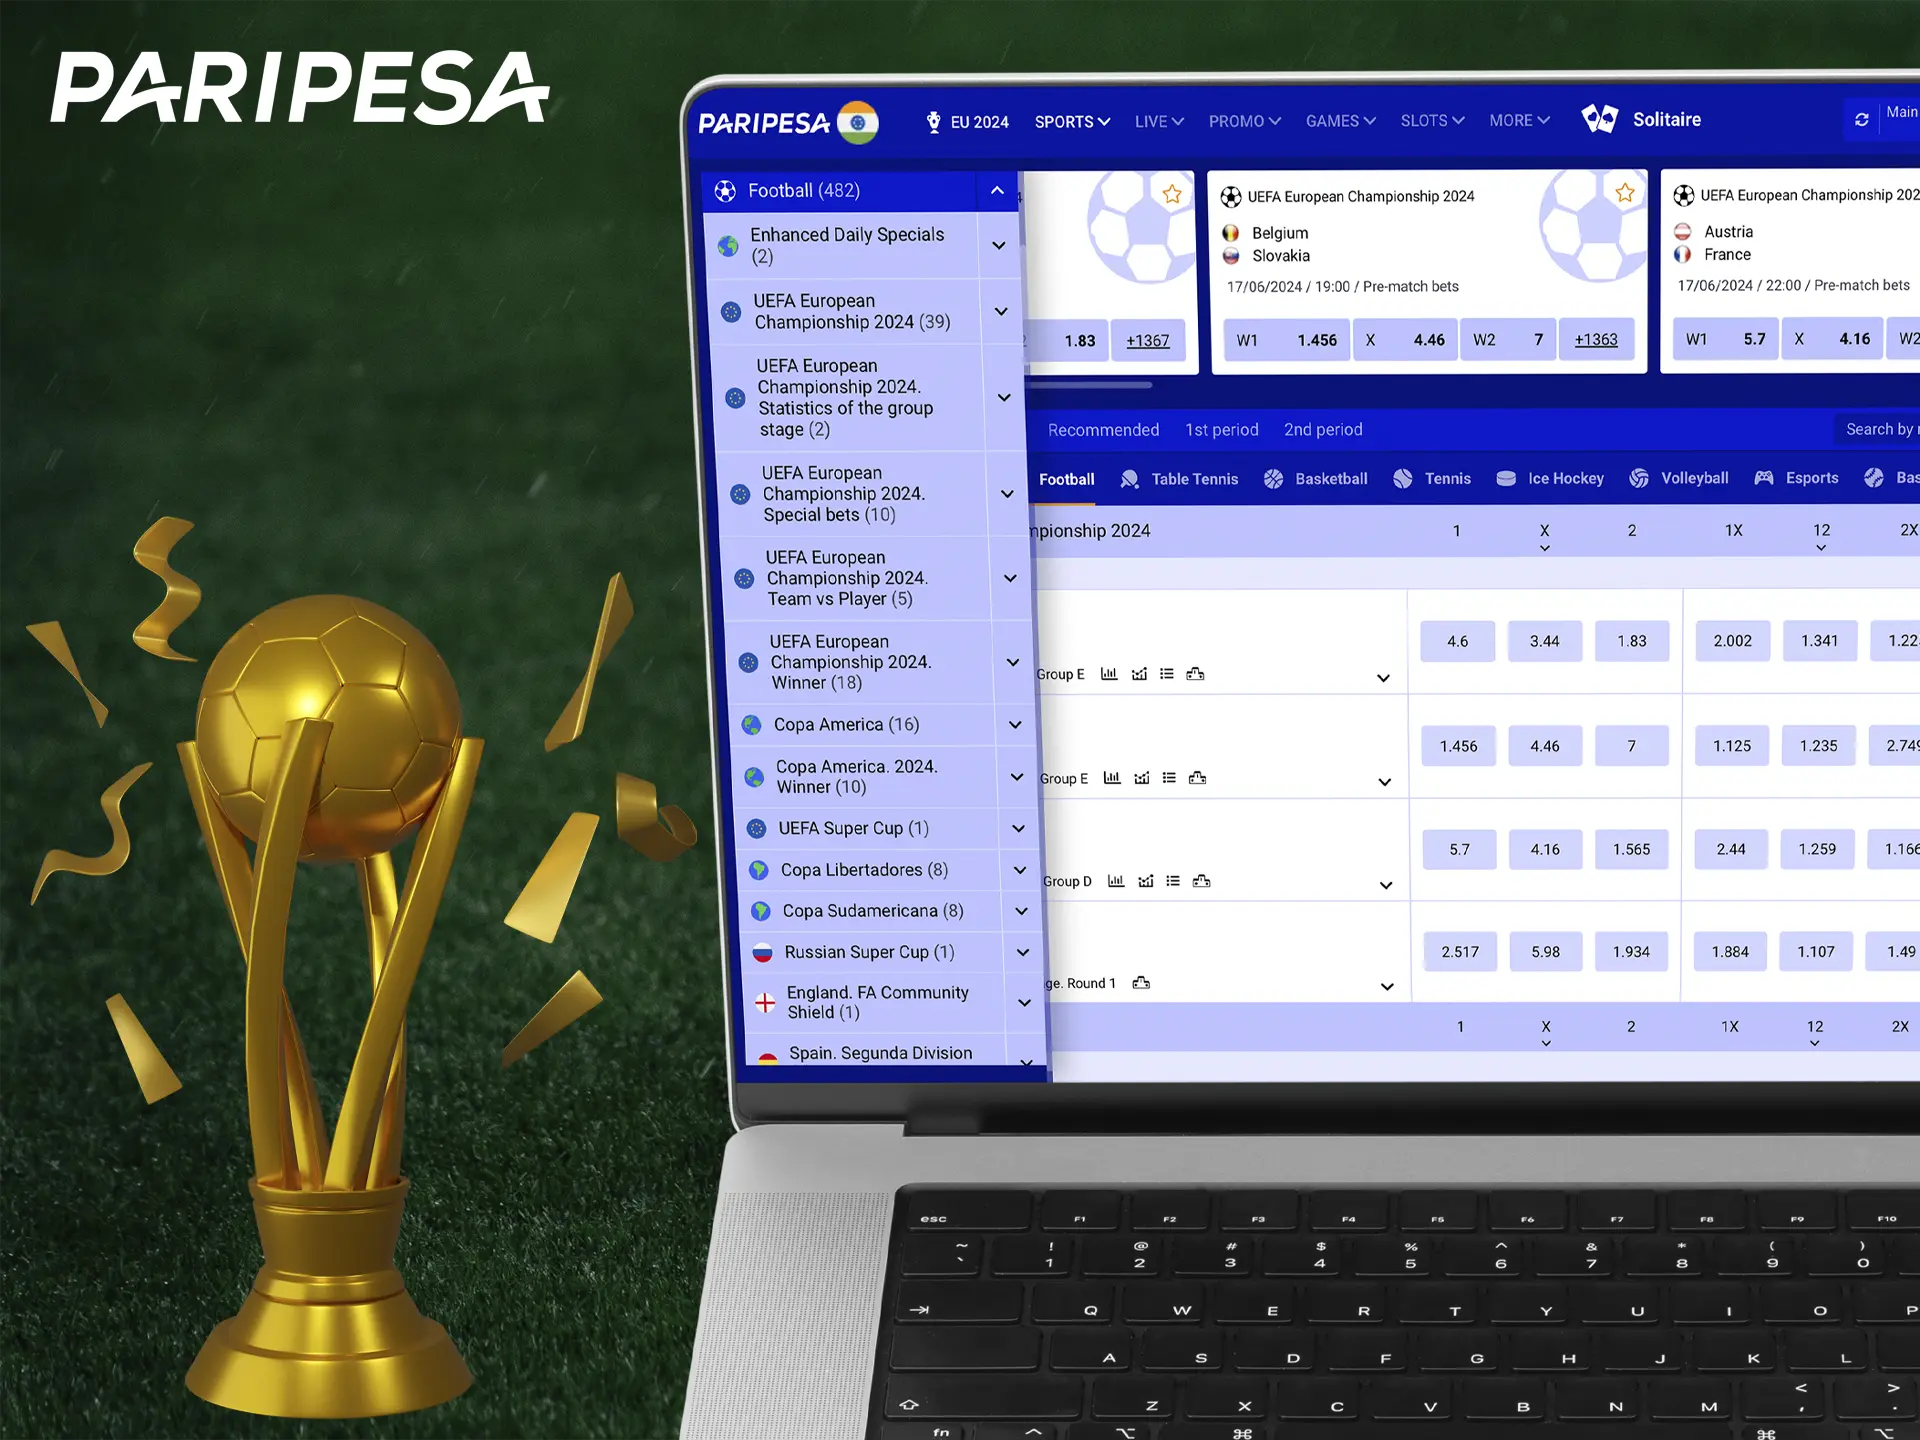 The most high-profile tournaments and football events are available for your predictions at Paripesa bookmaker.